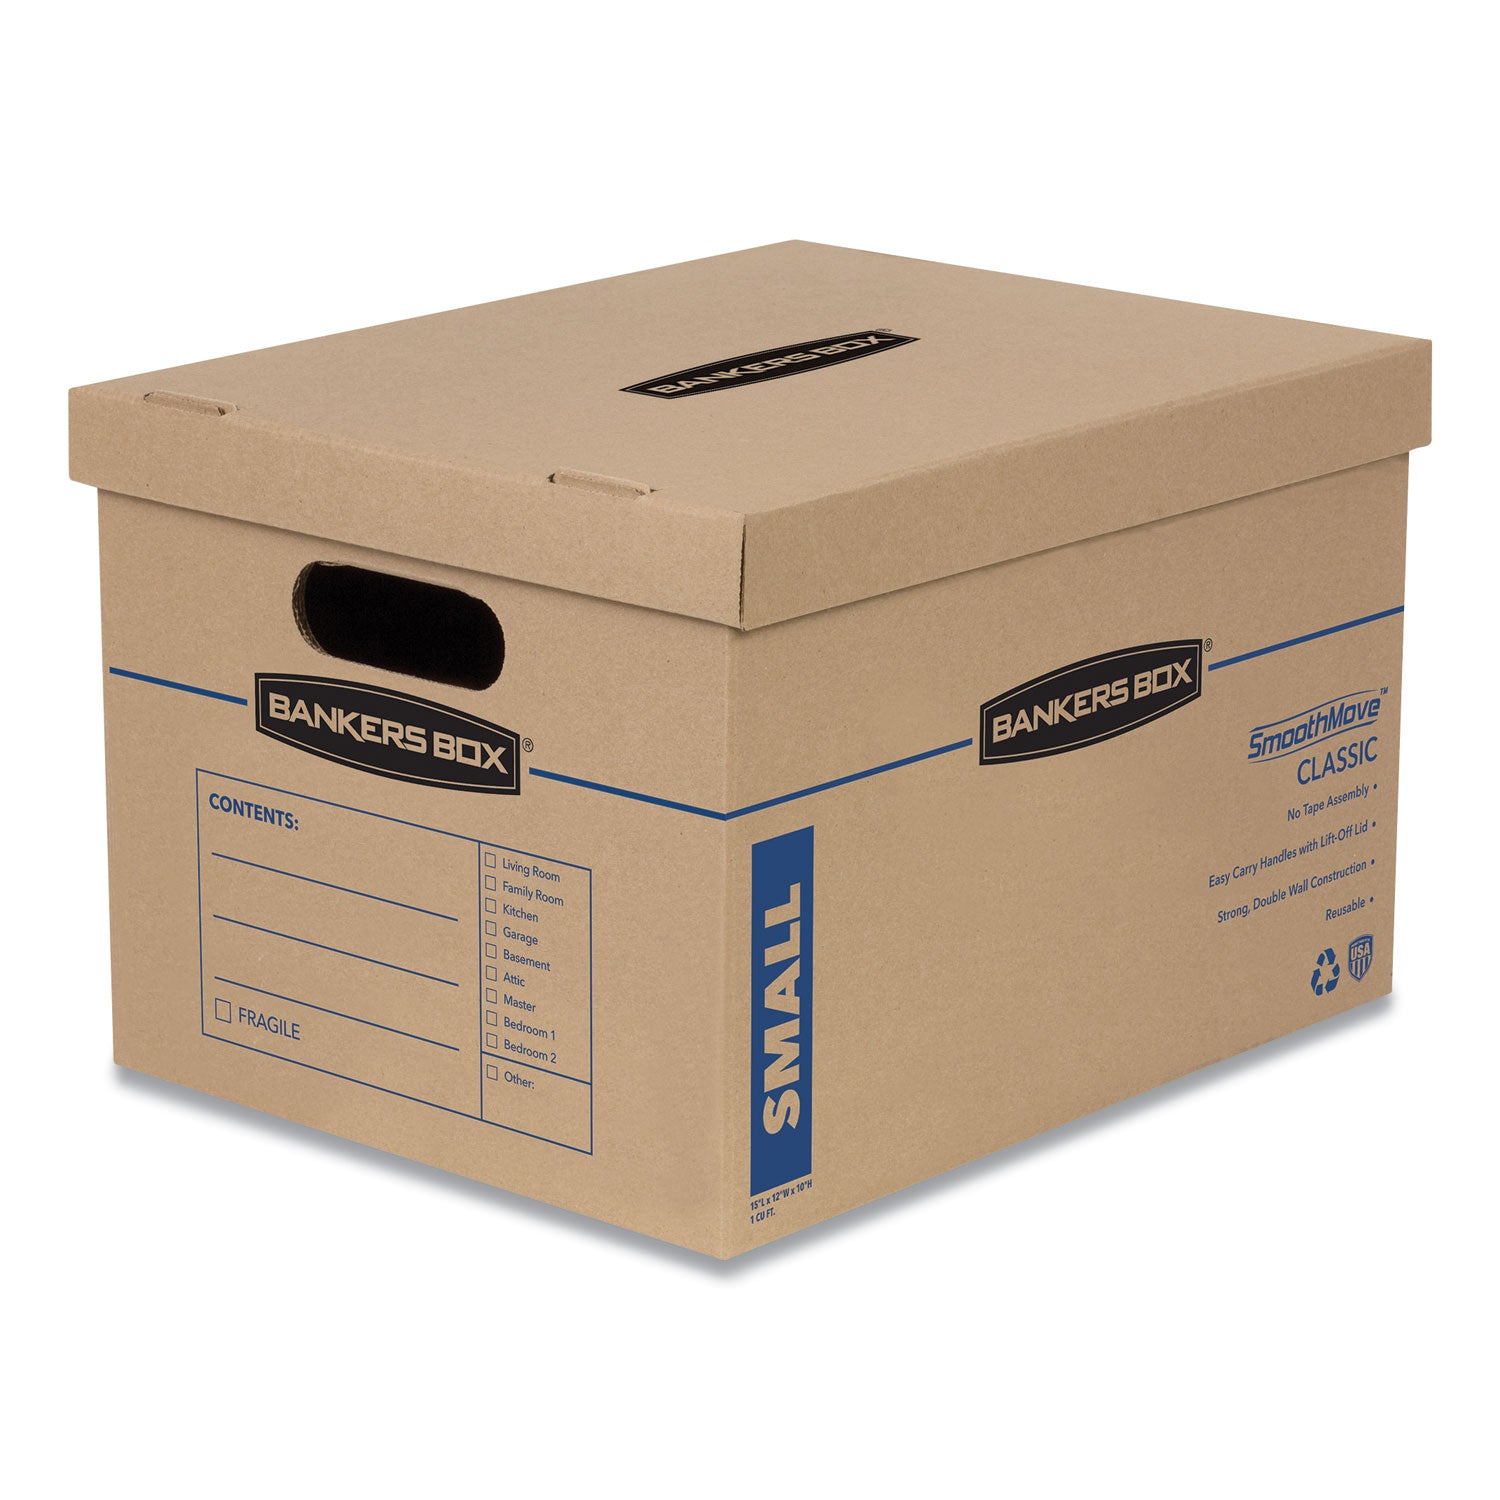 SmoothMove Classic Moving/Storage Boxes, Half Slotted Container (HSC), Small, 12" x 15" x 10", Brown/Blue, 10/Carton - 